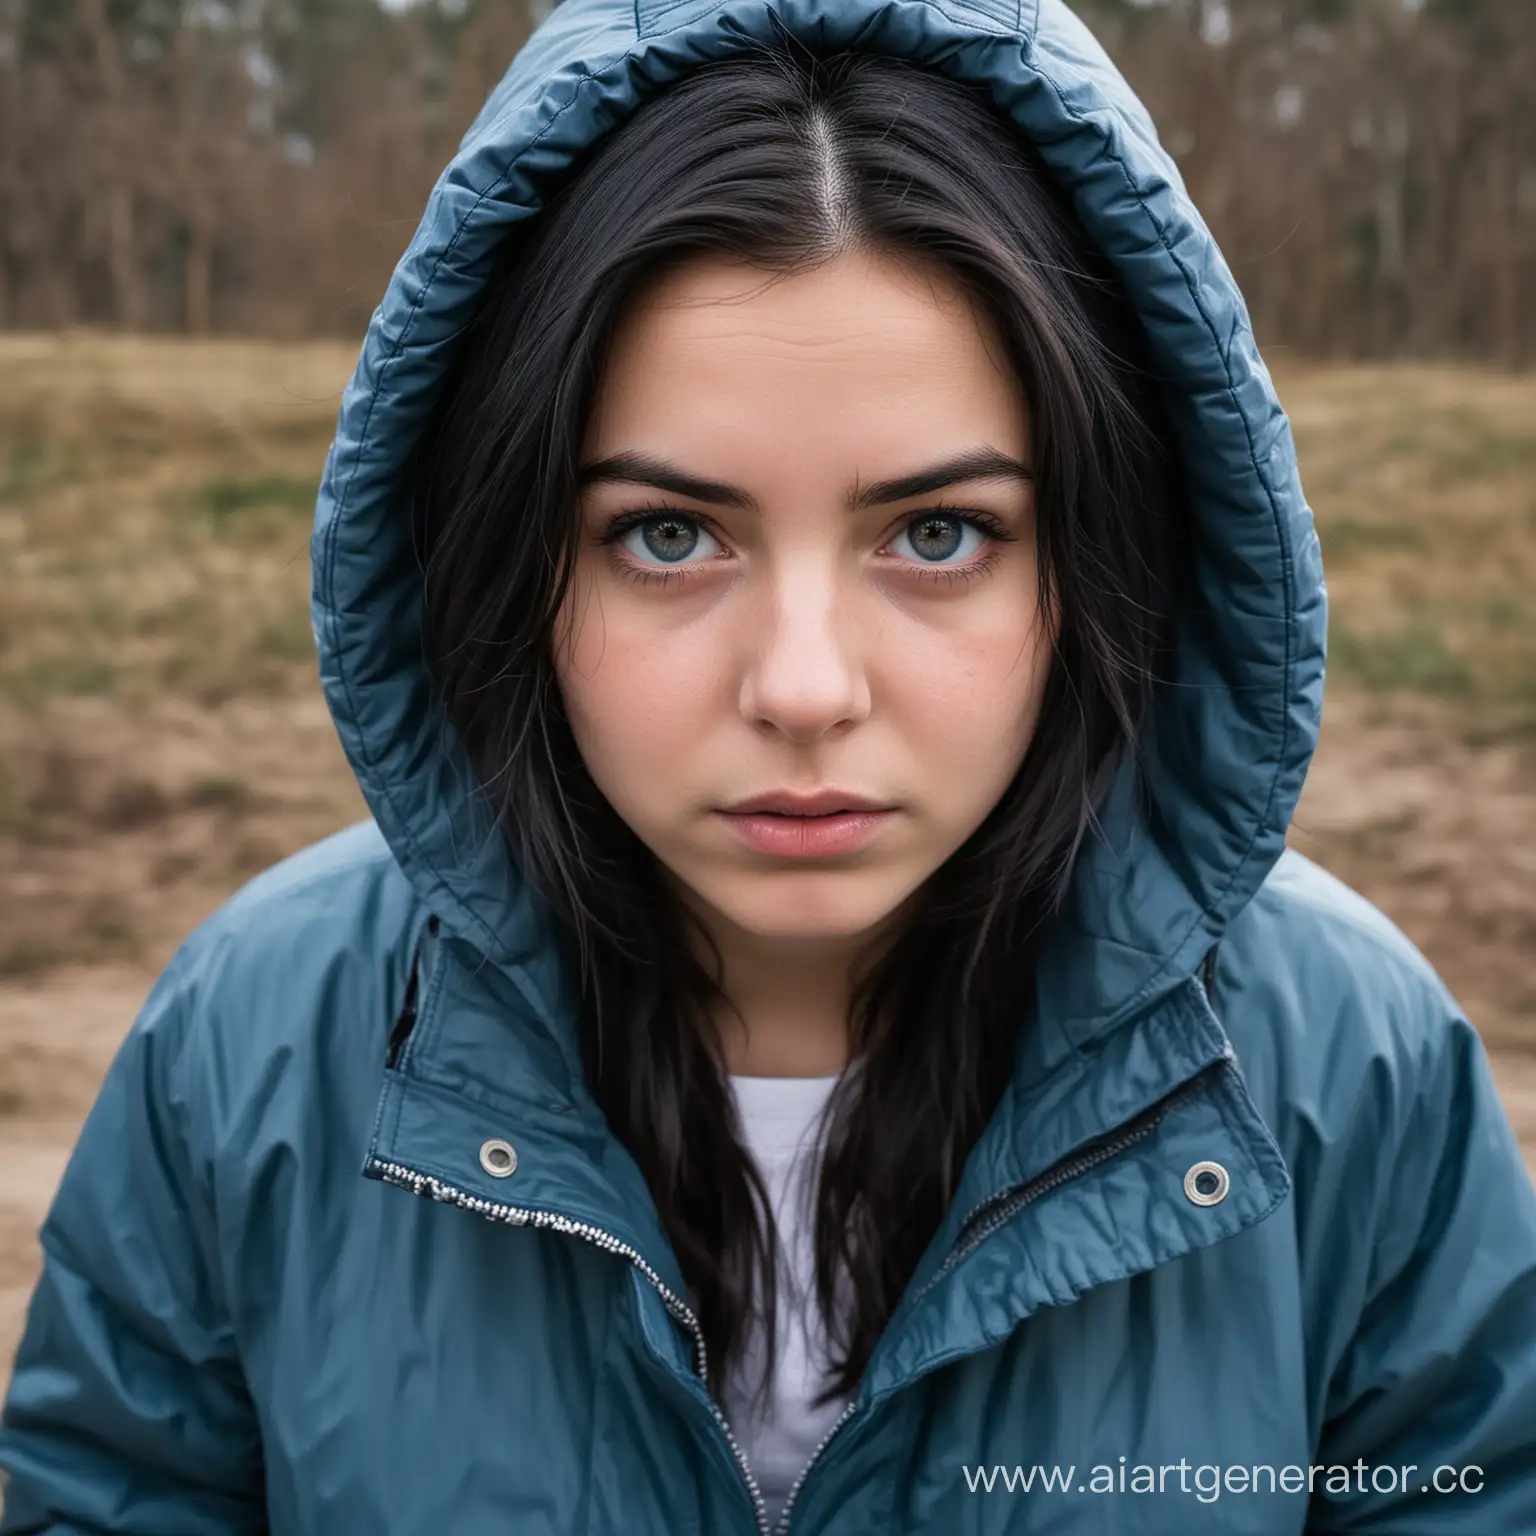 A girl in a blue parka and dark hair with a stern expression on her face